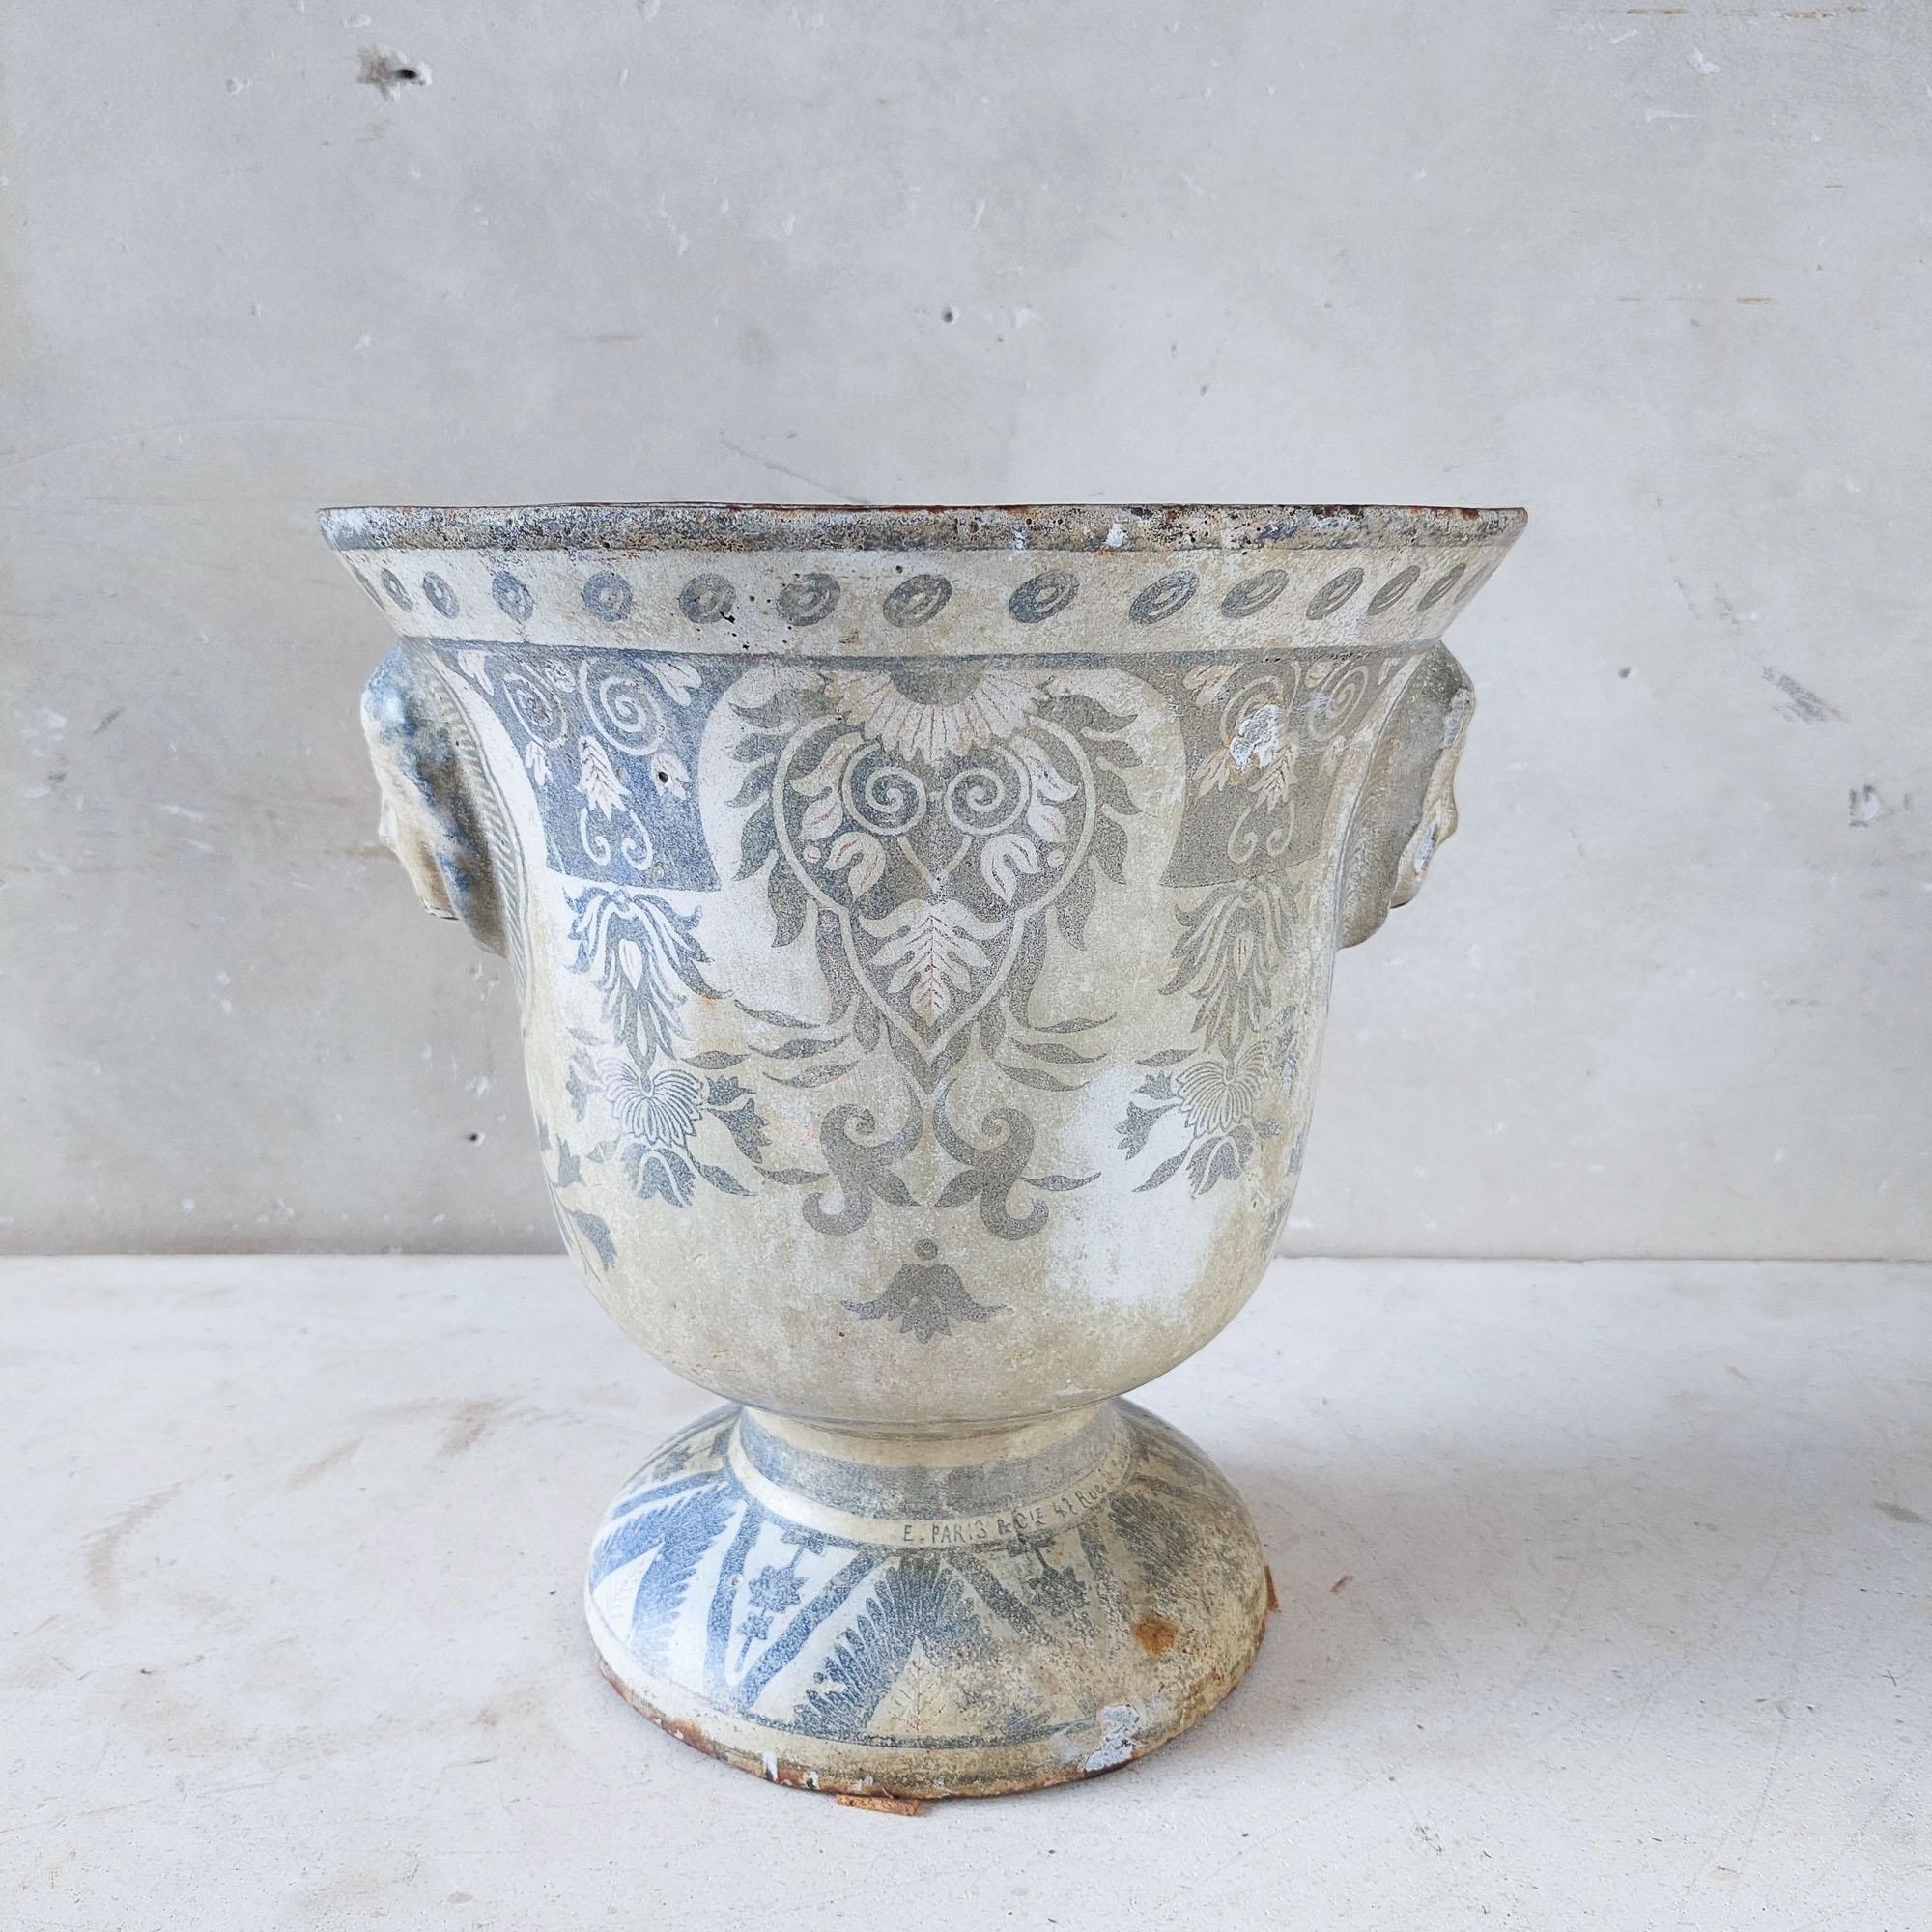 Add a touch of history to your decor with this 19th-century enameled cast iron vase from Paris en Cie. Featuring delicate white and blue motifs, it's a timeless piece of craftsmanship. Standing at 32 cm tall with a diameter of 31 cm, this vase makes